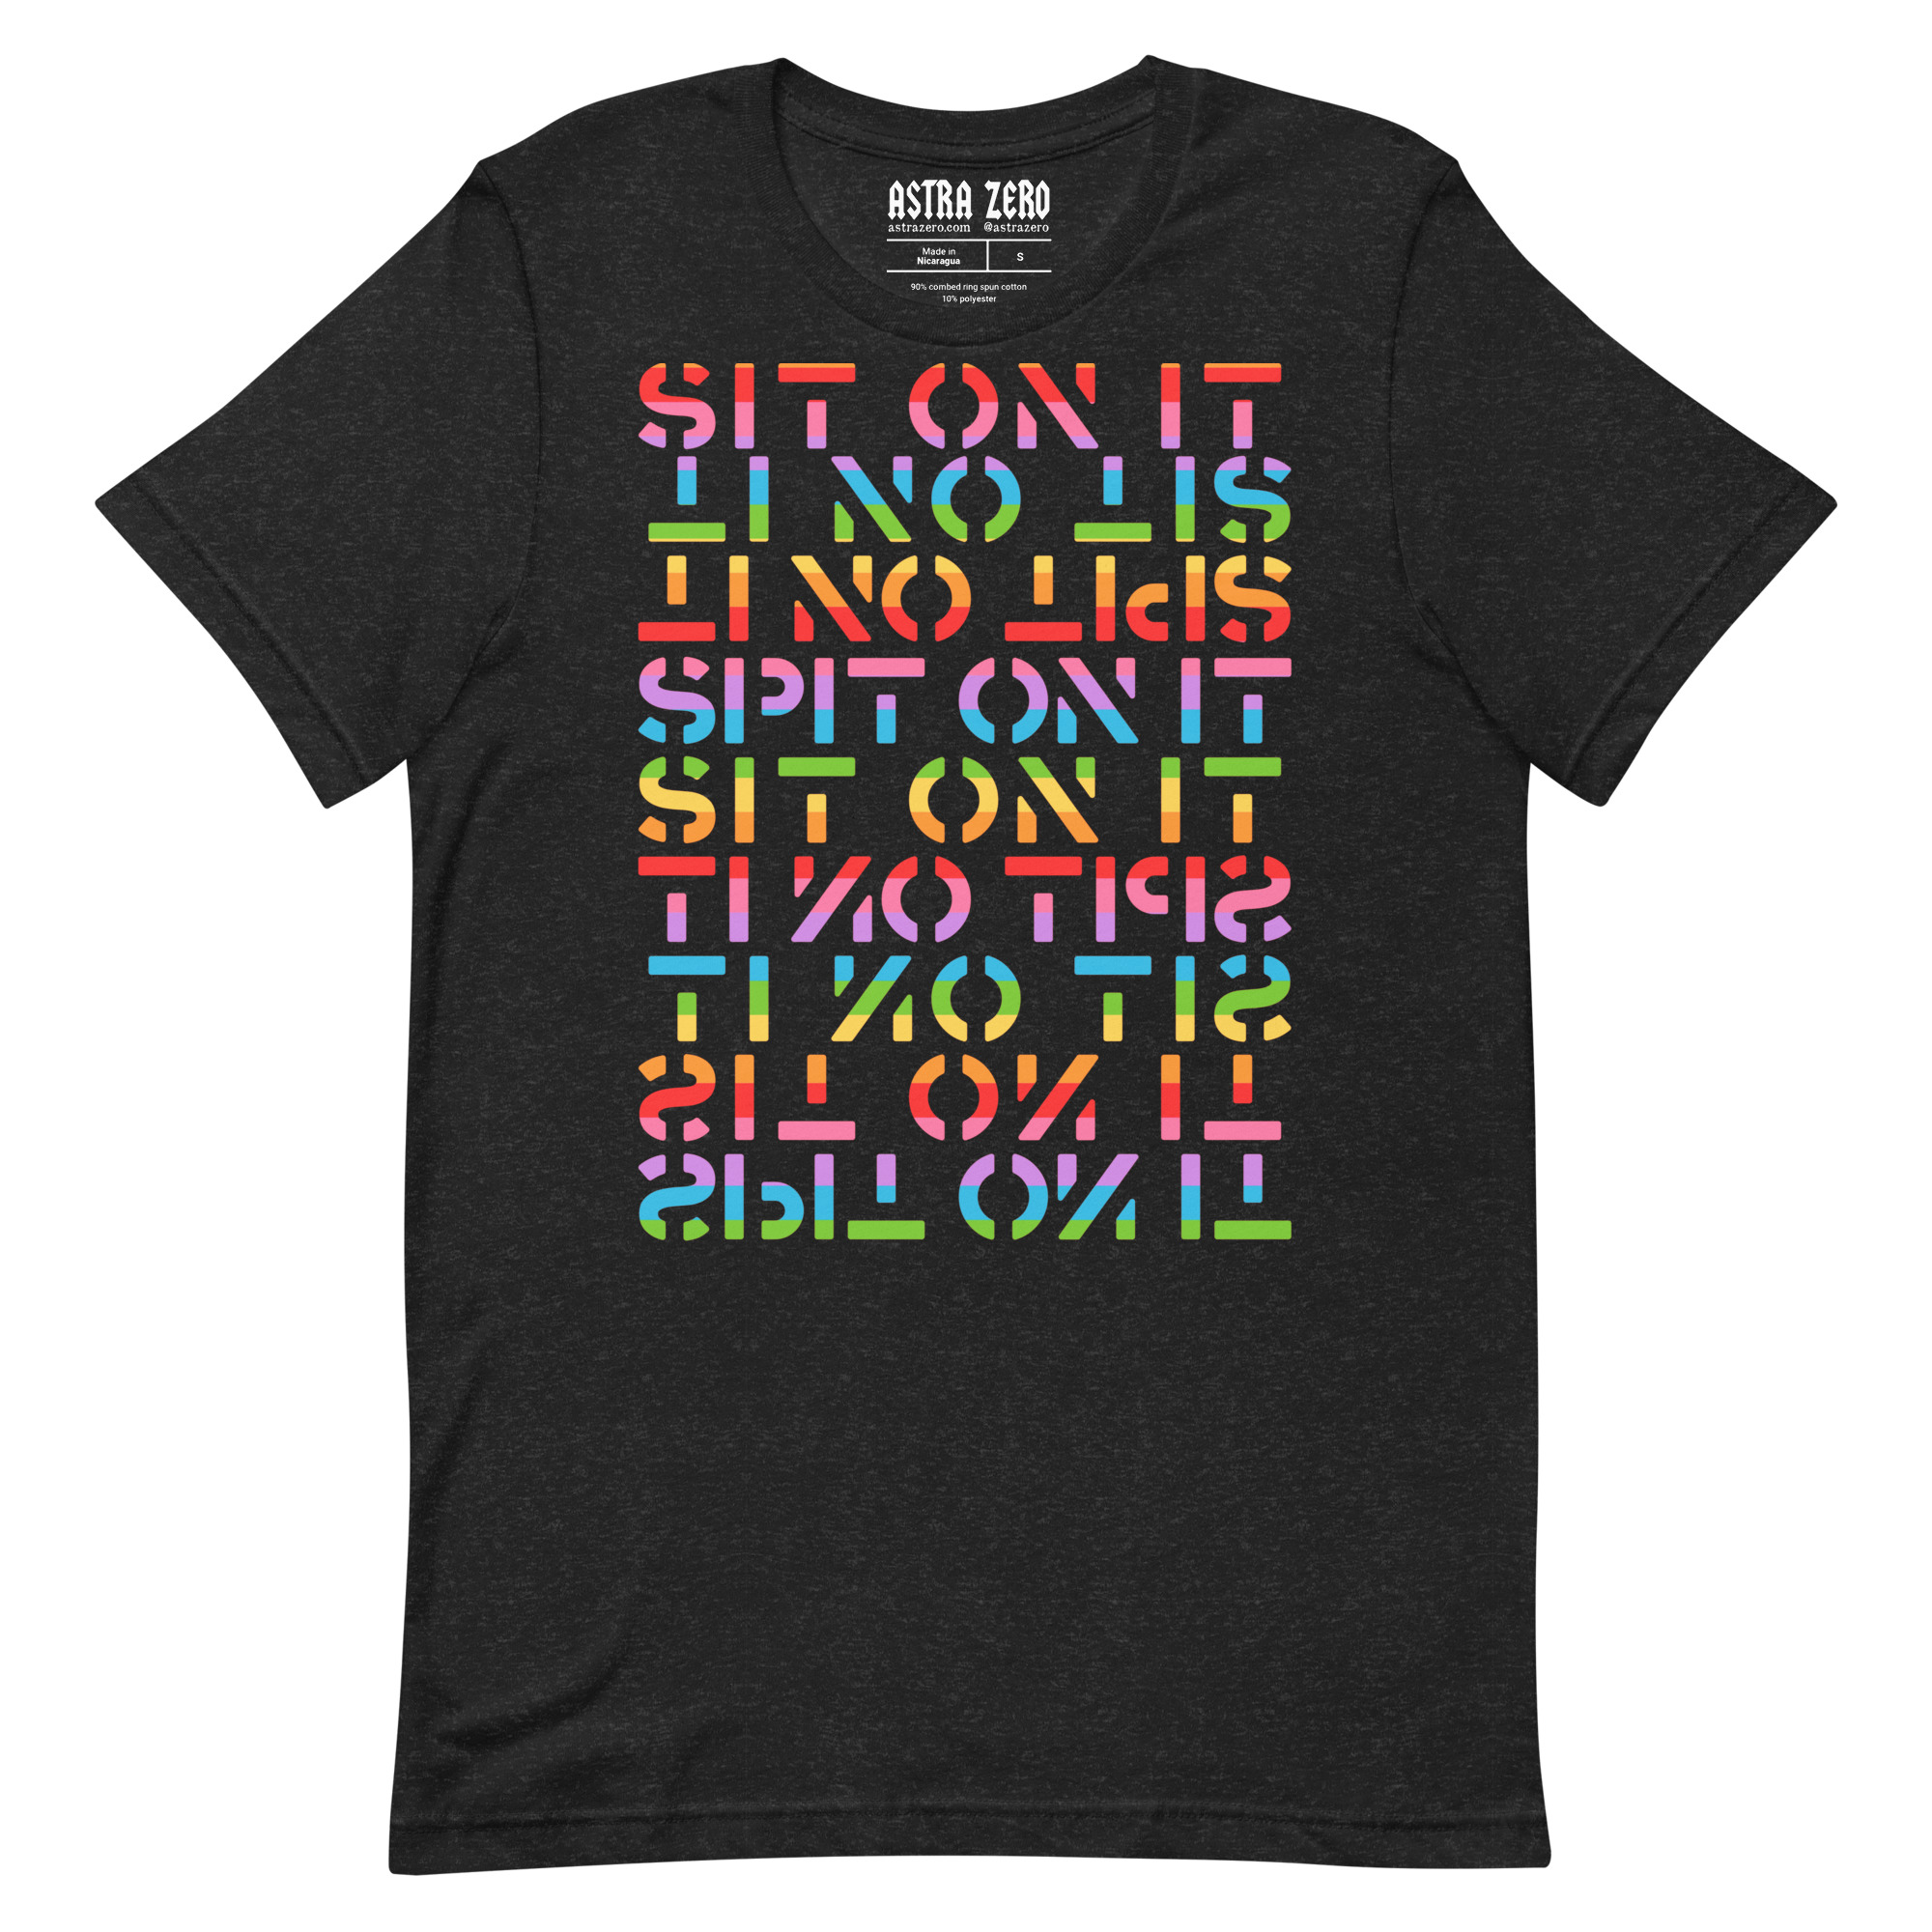 Featured image for “Sit on it Spit on it Rainbow Pride - Unisex t-shirt”